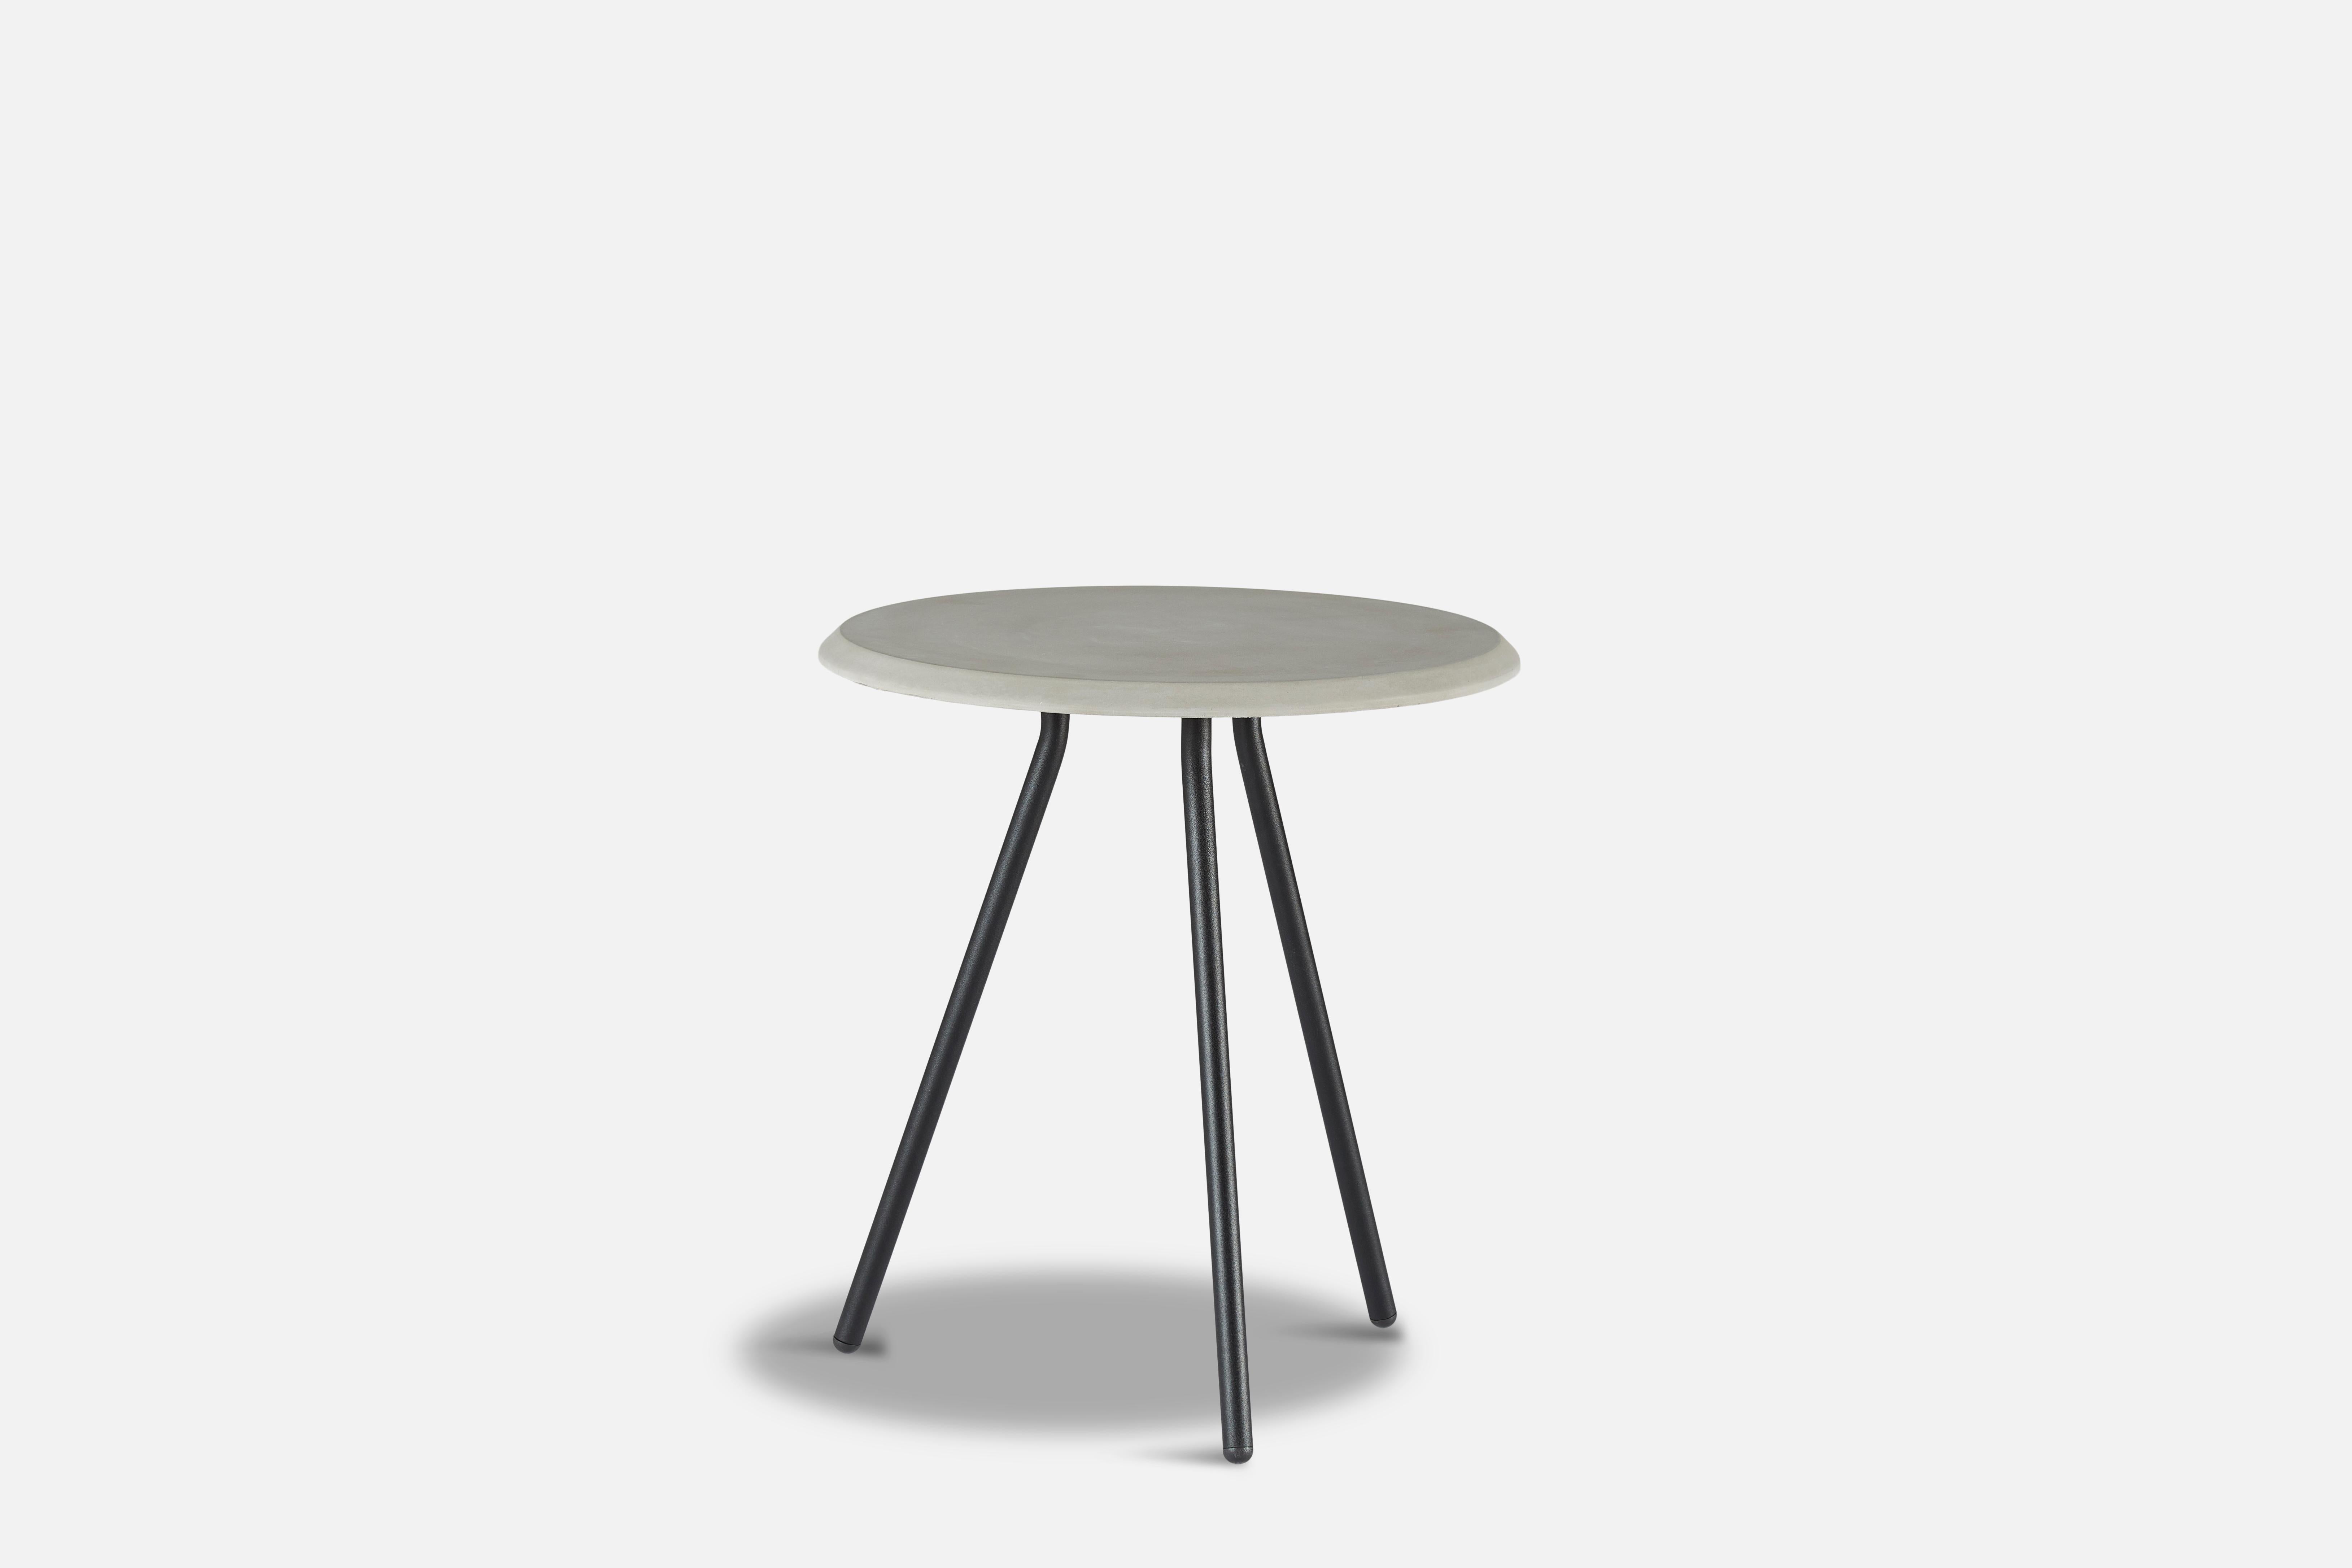 Concrete soround side table by Nur Design.
Materials: Metal, Fibre Concrete.
Dimensions: D 45 x W 45 x H 49 cm.
Also available in different sizes and materials: Nano Laminate, Ash, Fibre Concrete. 

The founders, Mia and Torben Koed, decided to